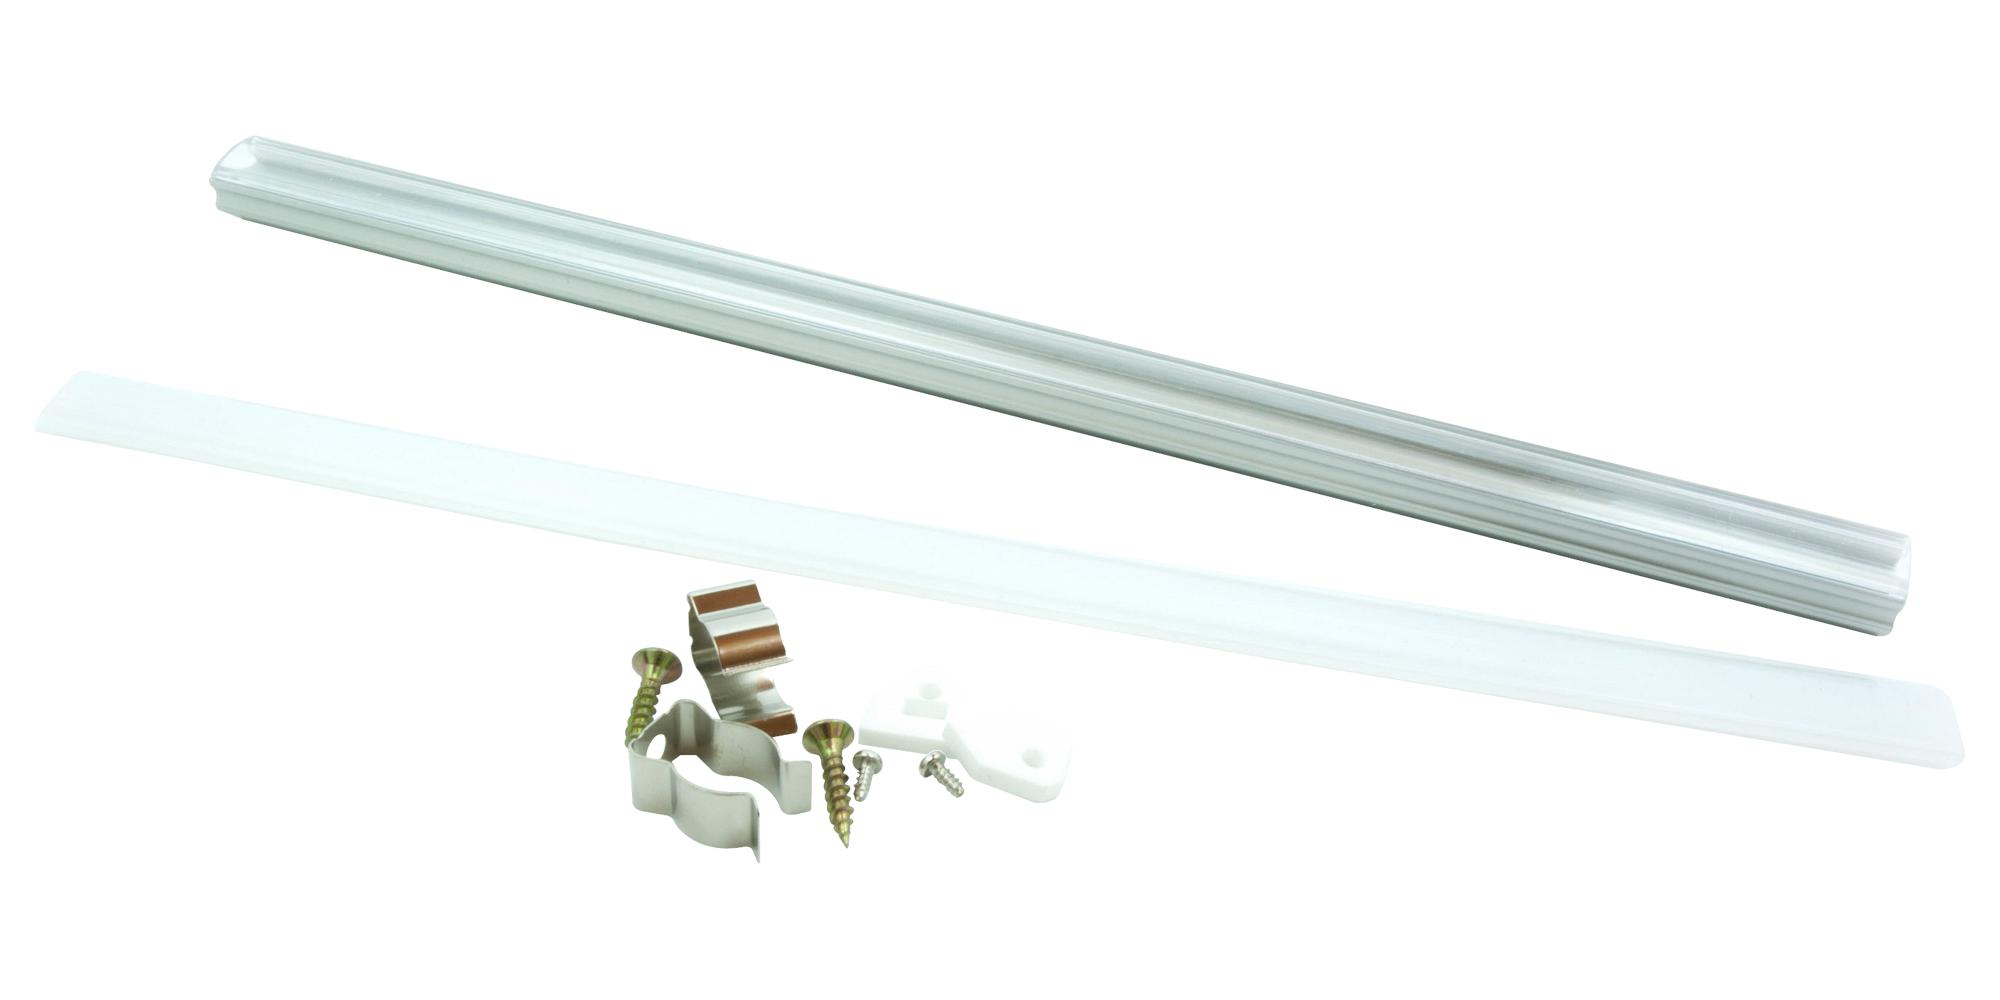 Intelligent Led Solutions Ilk-Flexext-0310-002. Kit, Led Strip, Angled Extrusion, 310mm